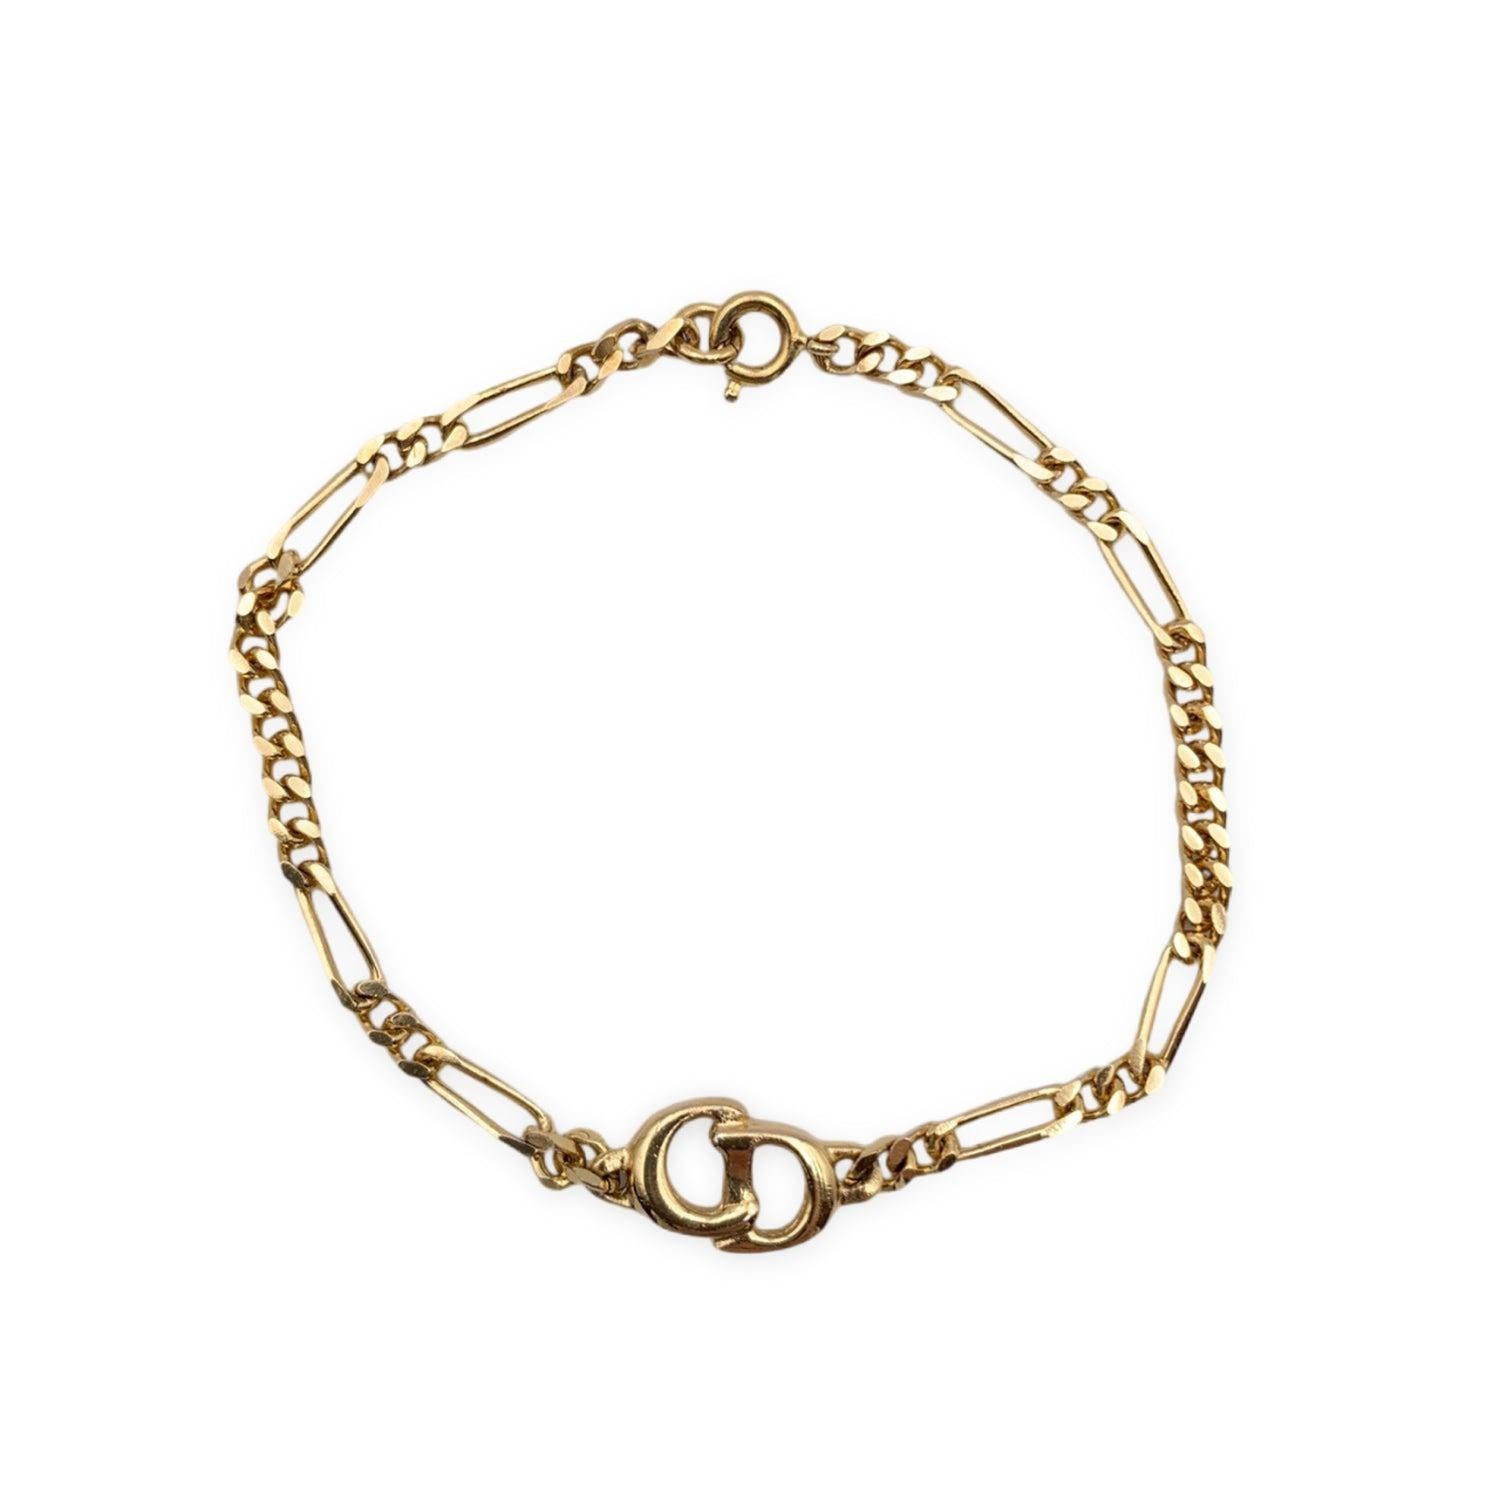 Christian Dior Vintage Gold Metal CD Logo Chain Bracelet In Excellent Condition For Sale In Rome, Rome